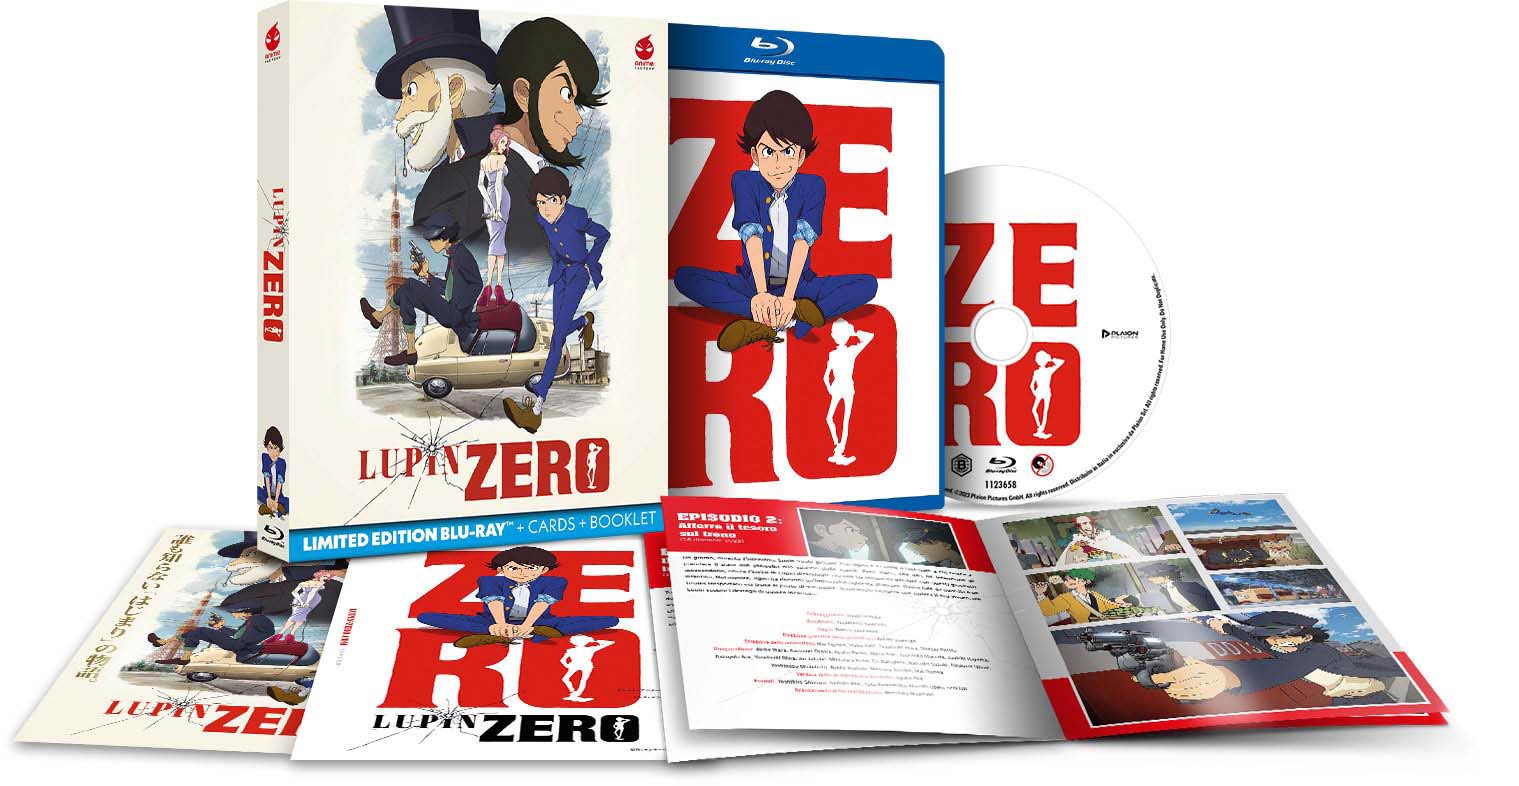 Lupin Zero - Limited Edition Blu-ray + Cards + Booklet (Blu-ray) Image 2